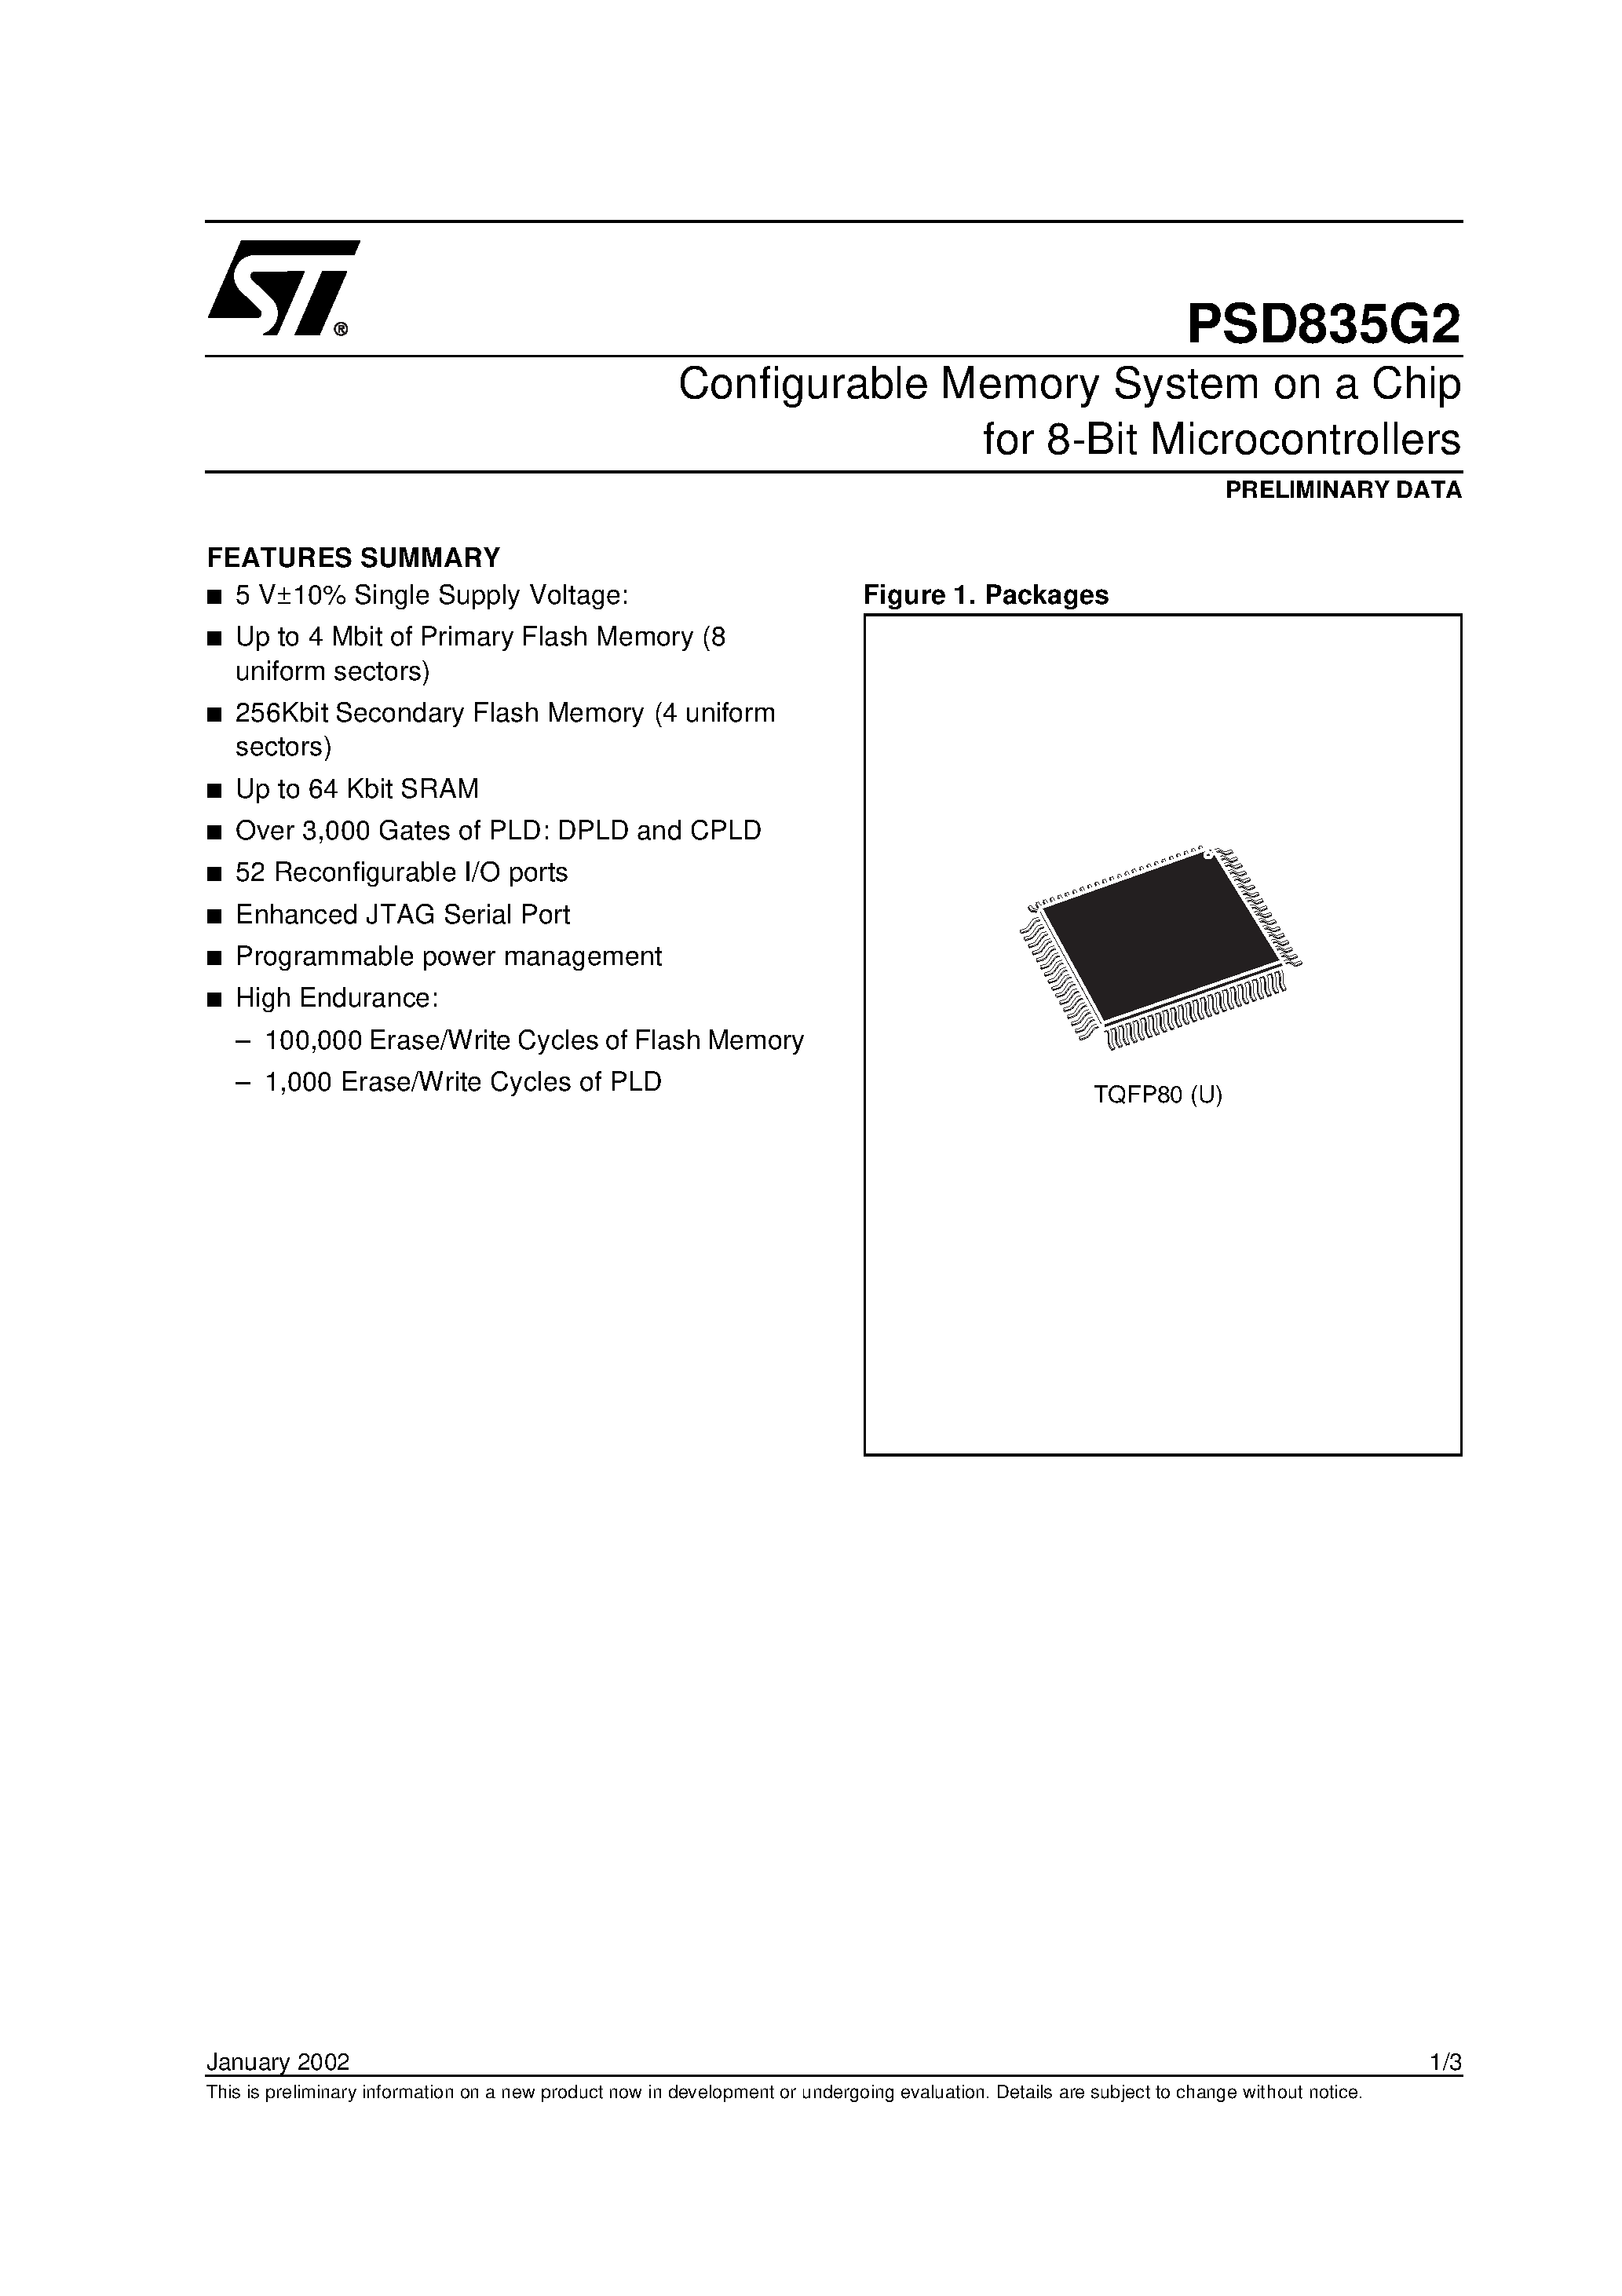 Datasheet PSD835F1-A-90B81I - Configurable Memory System on a Chip for 8-Bit Microcontrollers page 1